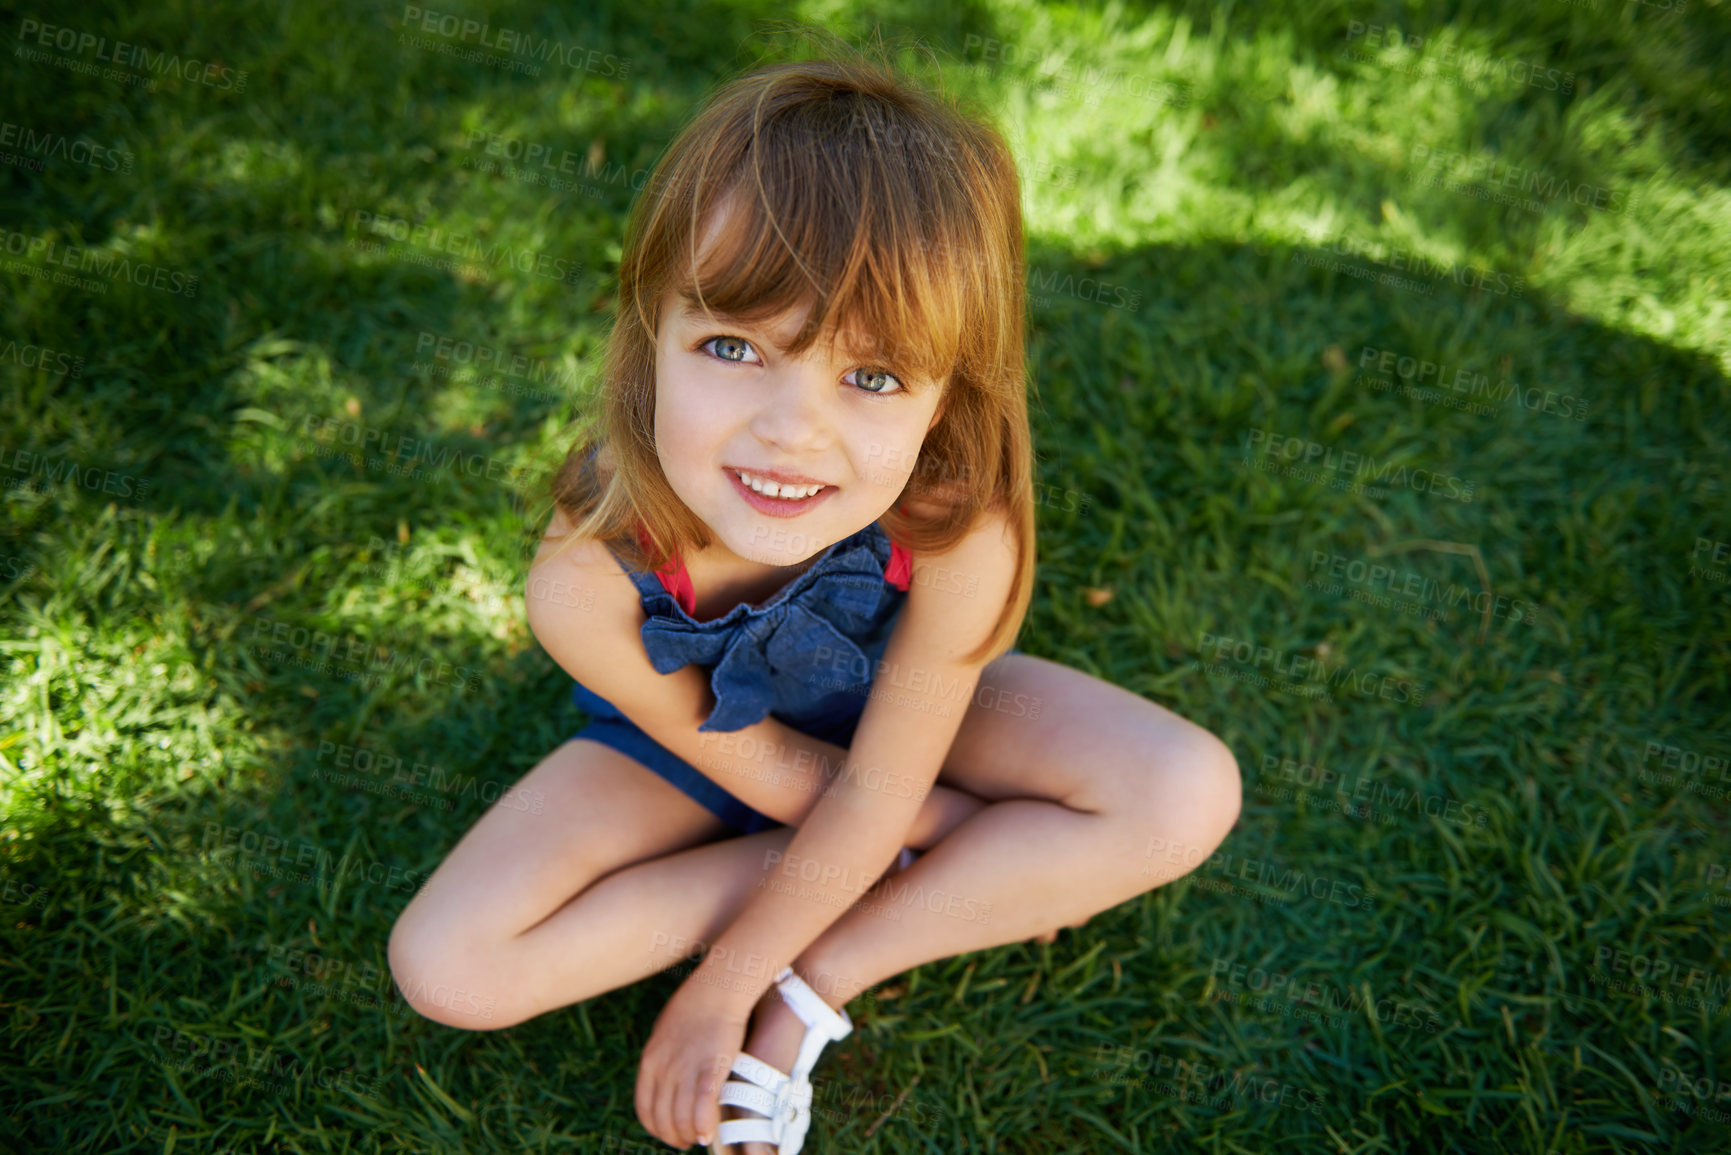 Buy stock photo Shot of a cute little girl smiling while lying down on grass